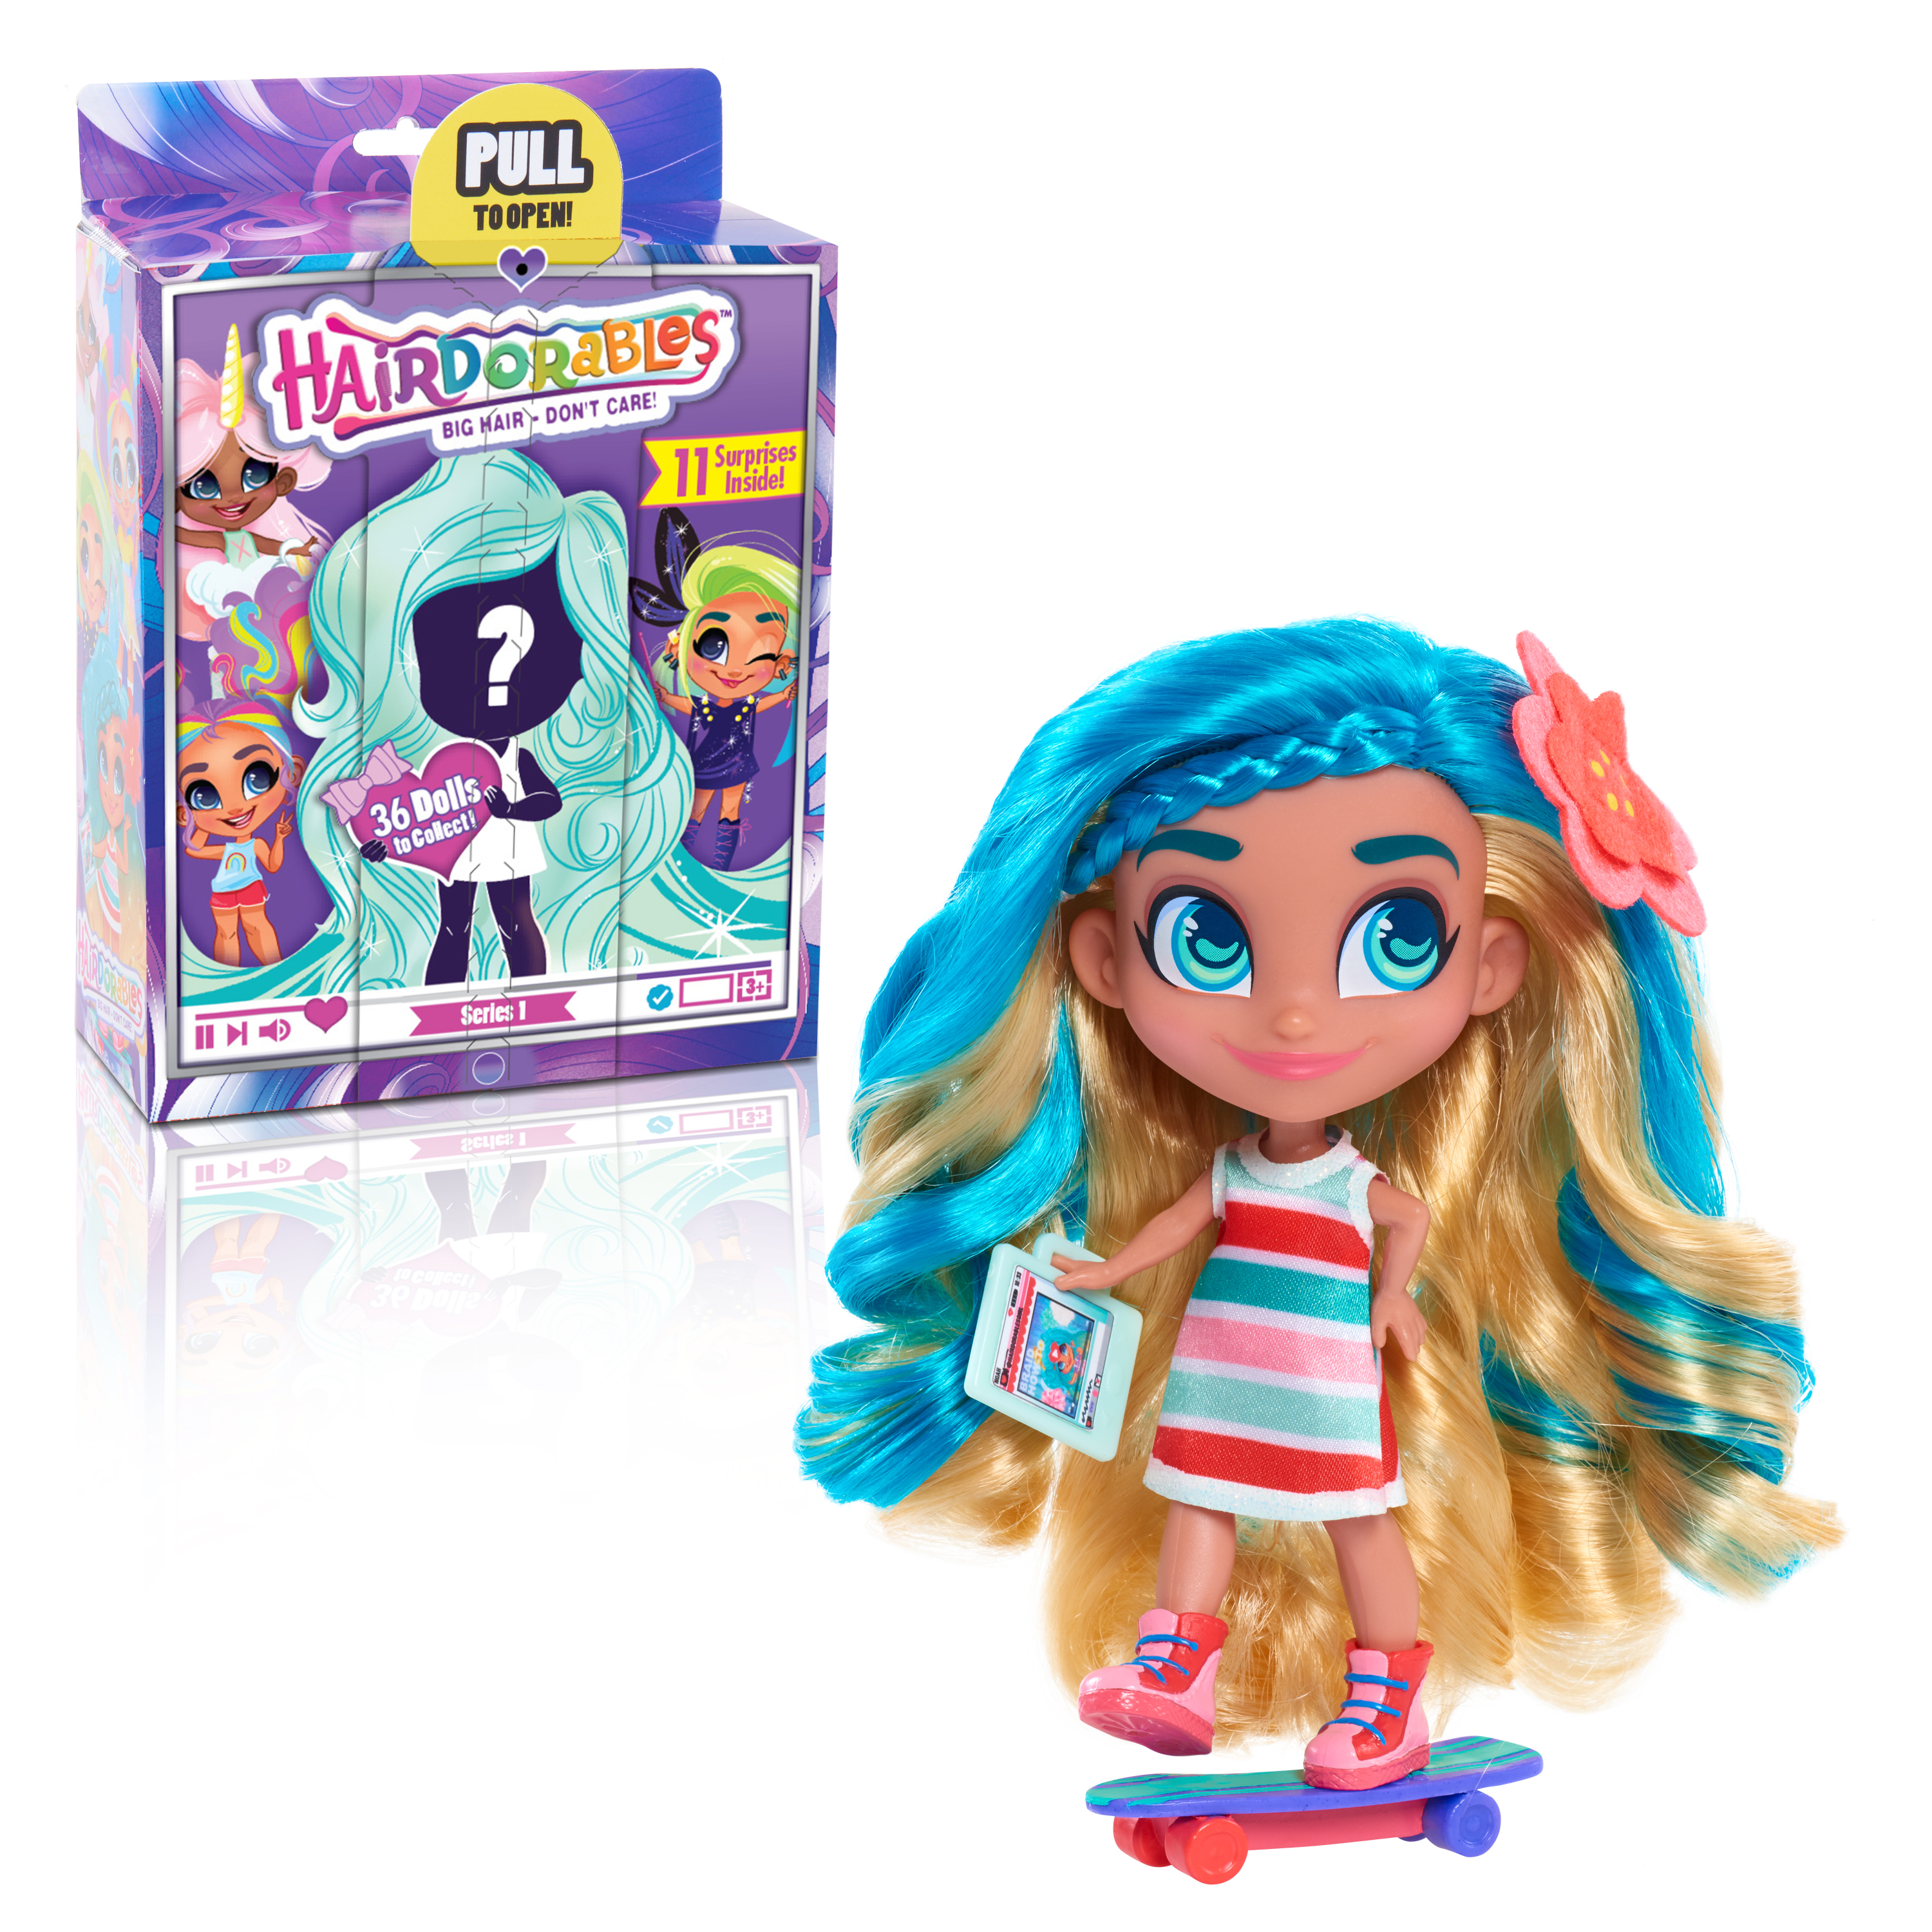 2019 Hairdorables Series 3 Collectible Doll 10 Accessories Ships for sale online 